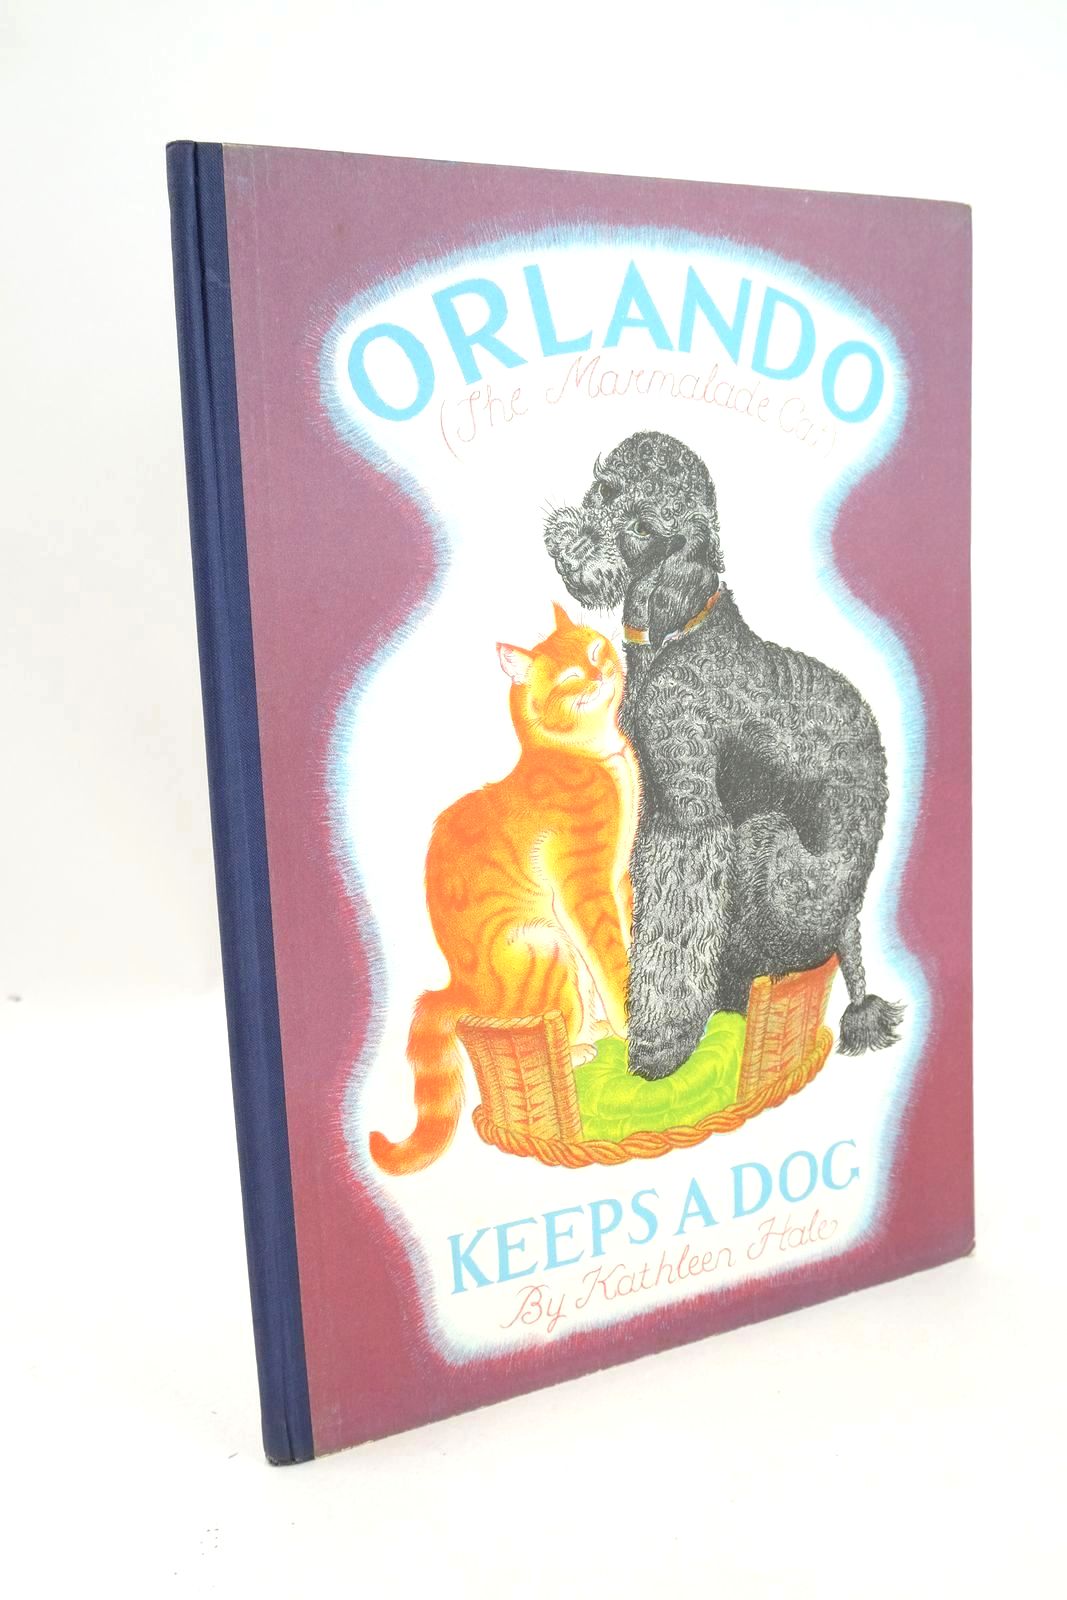 Photo of ORLANDO (THE MARMALADE CAT) KEEPS A DOG written by Hale, Kathleen illustrated by Hale, Kathleen published by Country Life (STOCK CODE: 1325735)  for sale by Stella & Rose's Books